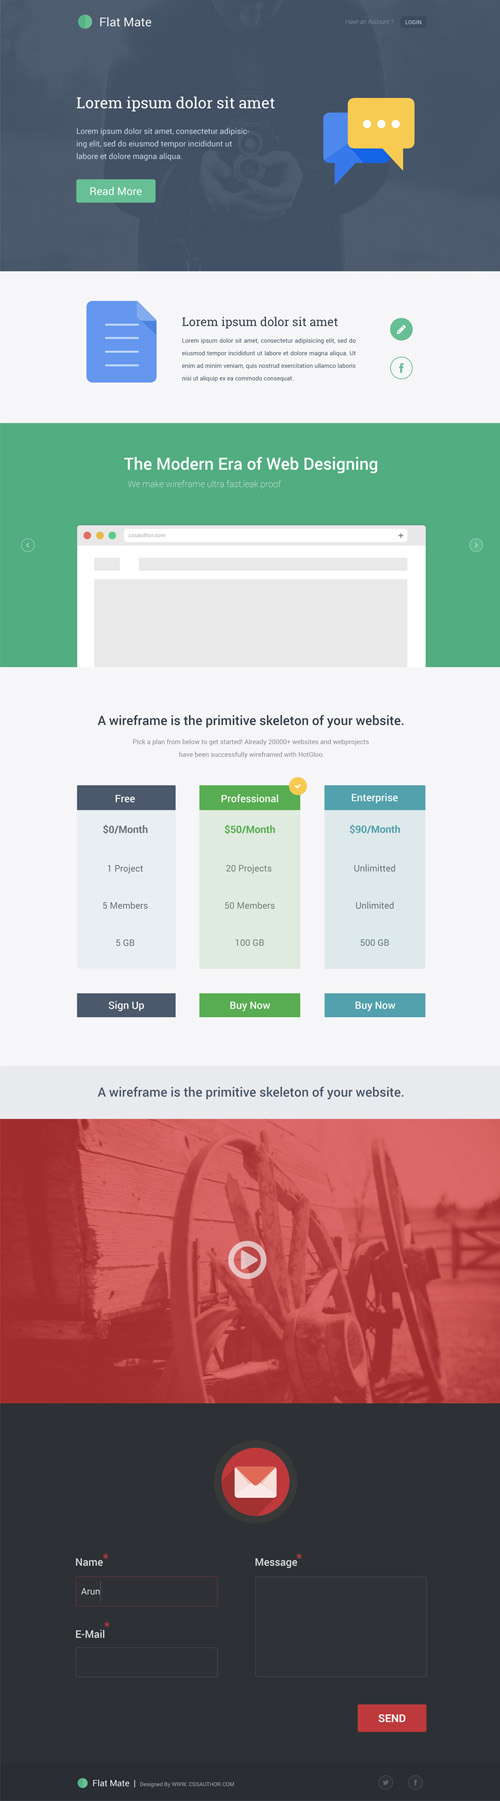 Flat Mate – Free Single Page Website Design Template Free PSD File